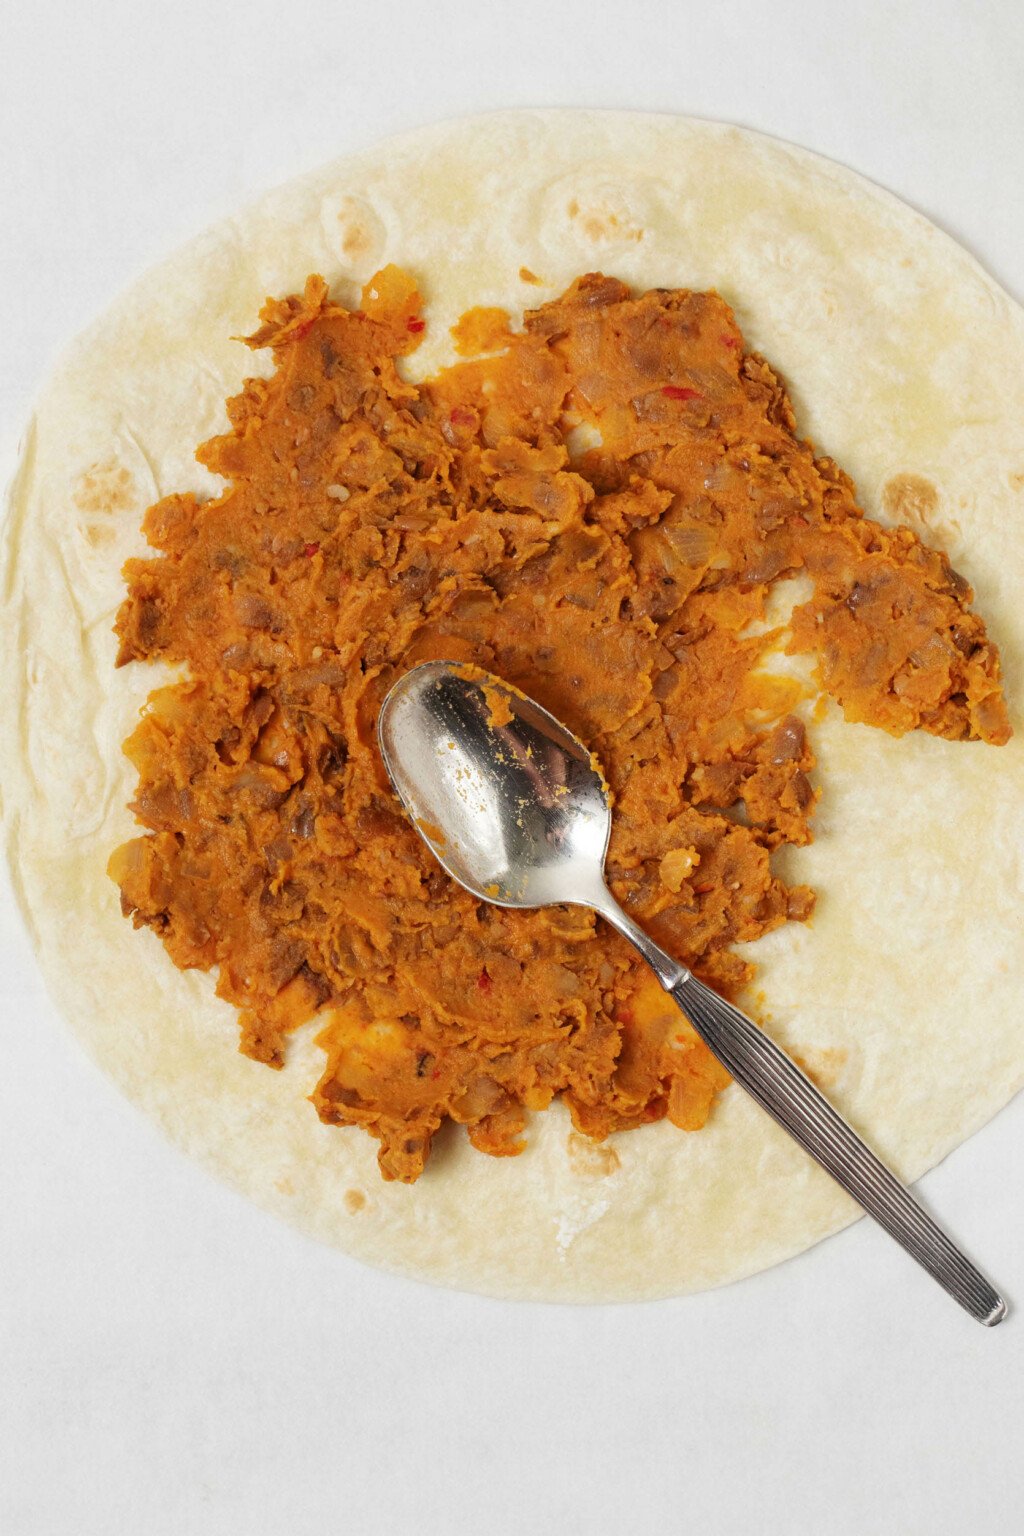 A tortilla is being covered in a refried bean spread.